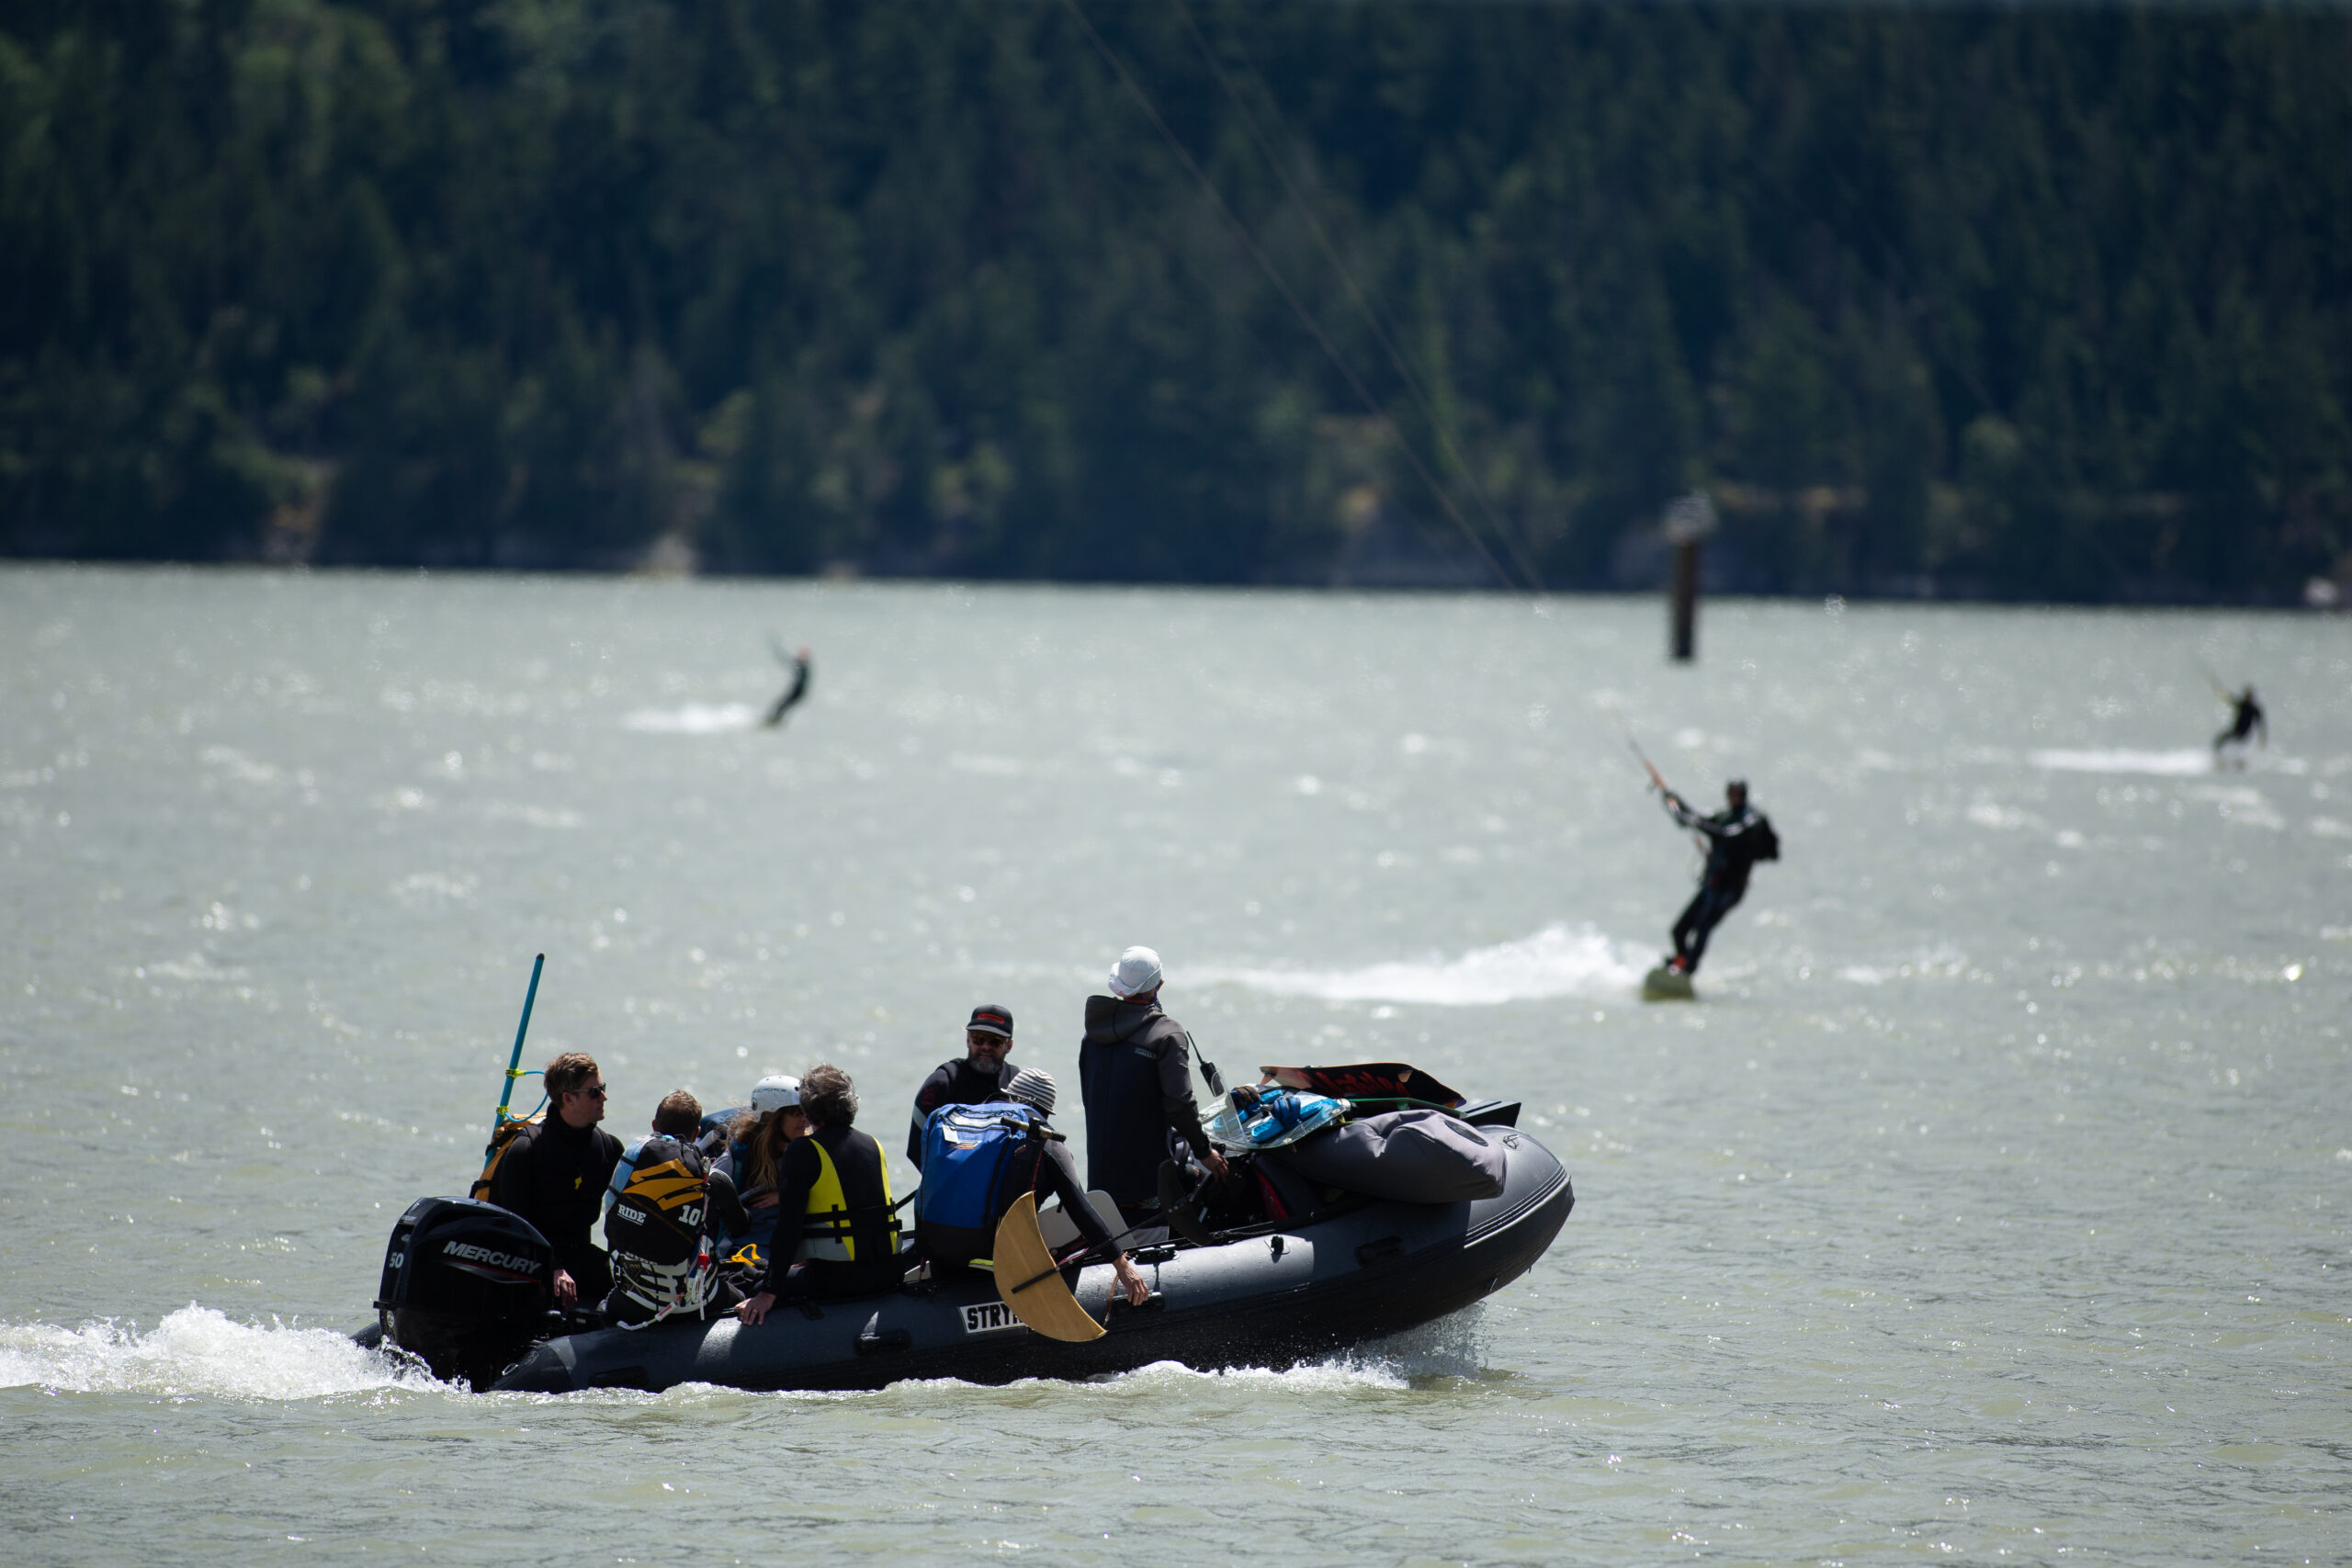 Squamish River: The Squamish River Windsports Society purchased the boat on the left to access Spit Island. President Sean Millington said members came to see the change wasn’t as disruptive as they had worried. Photo: Jesse Winter / The Narwhal